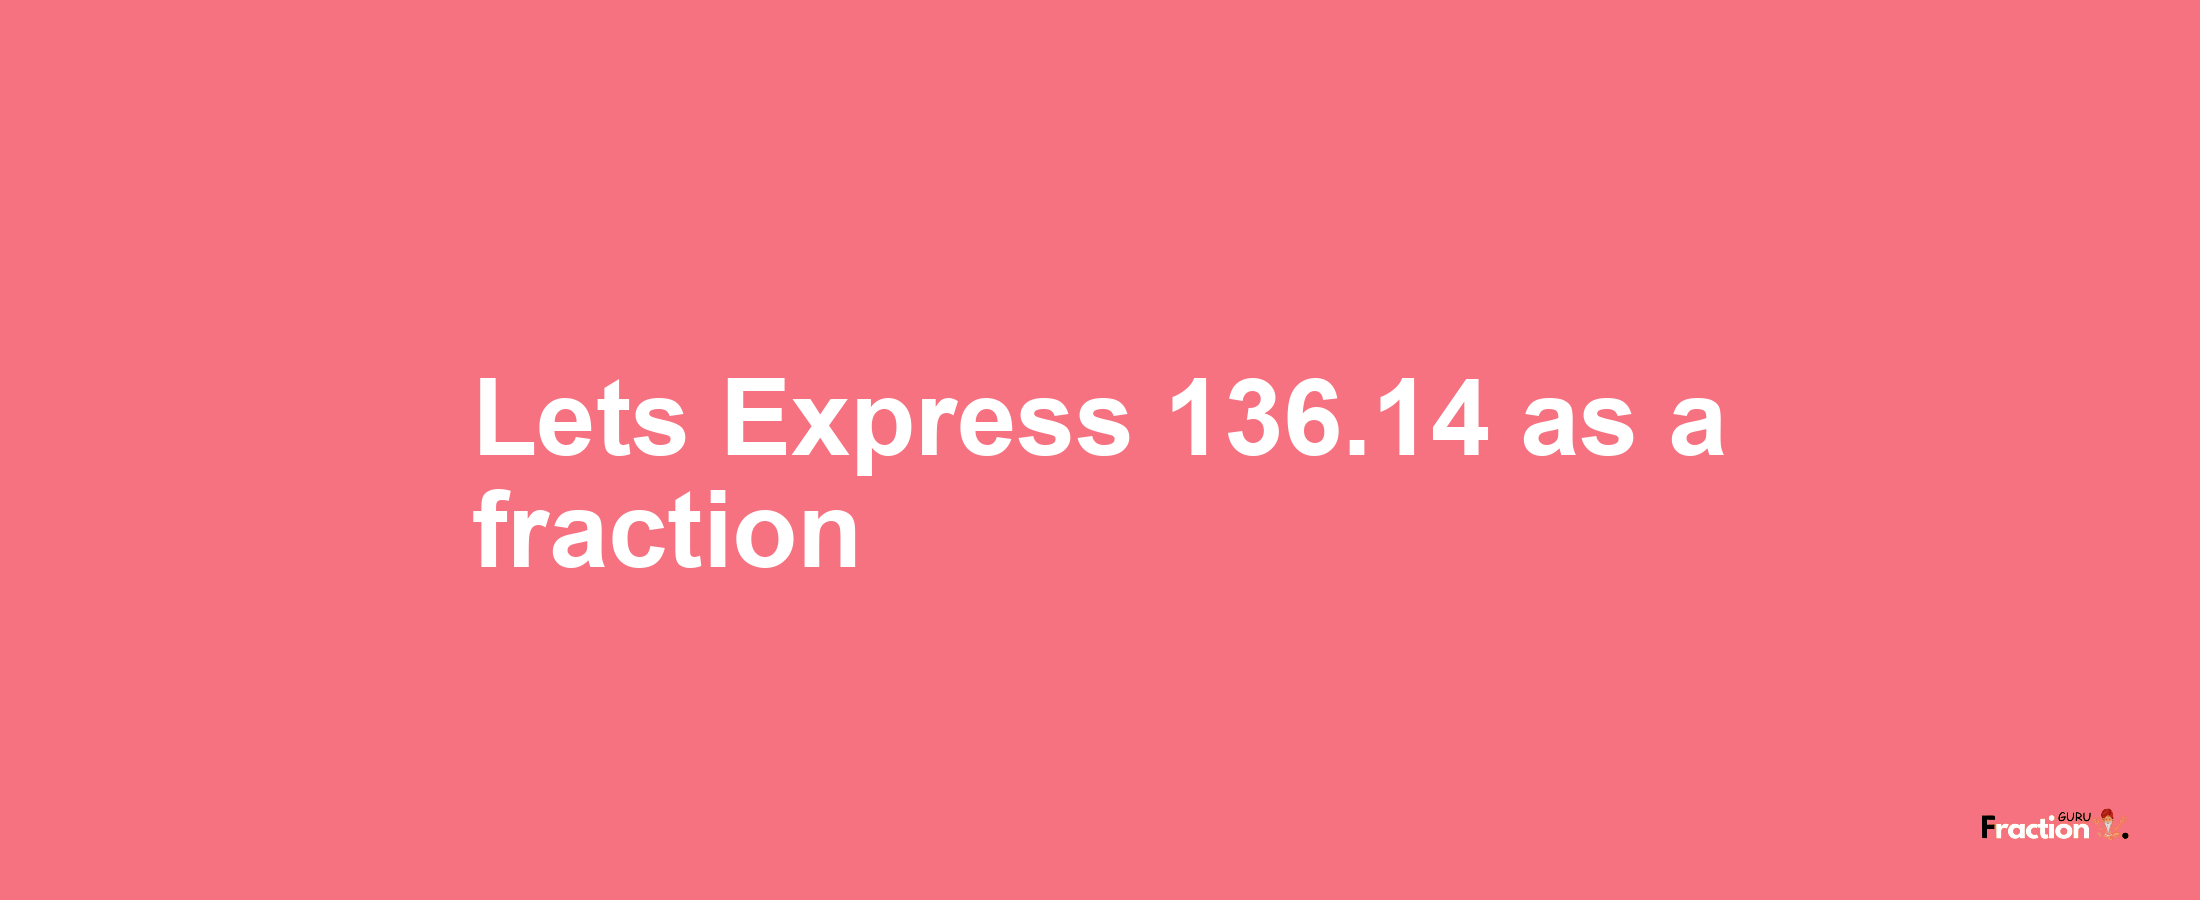 Lets Express 136.14 as afraction